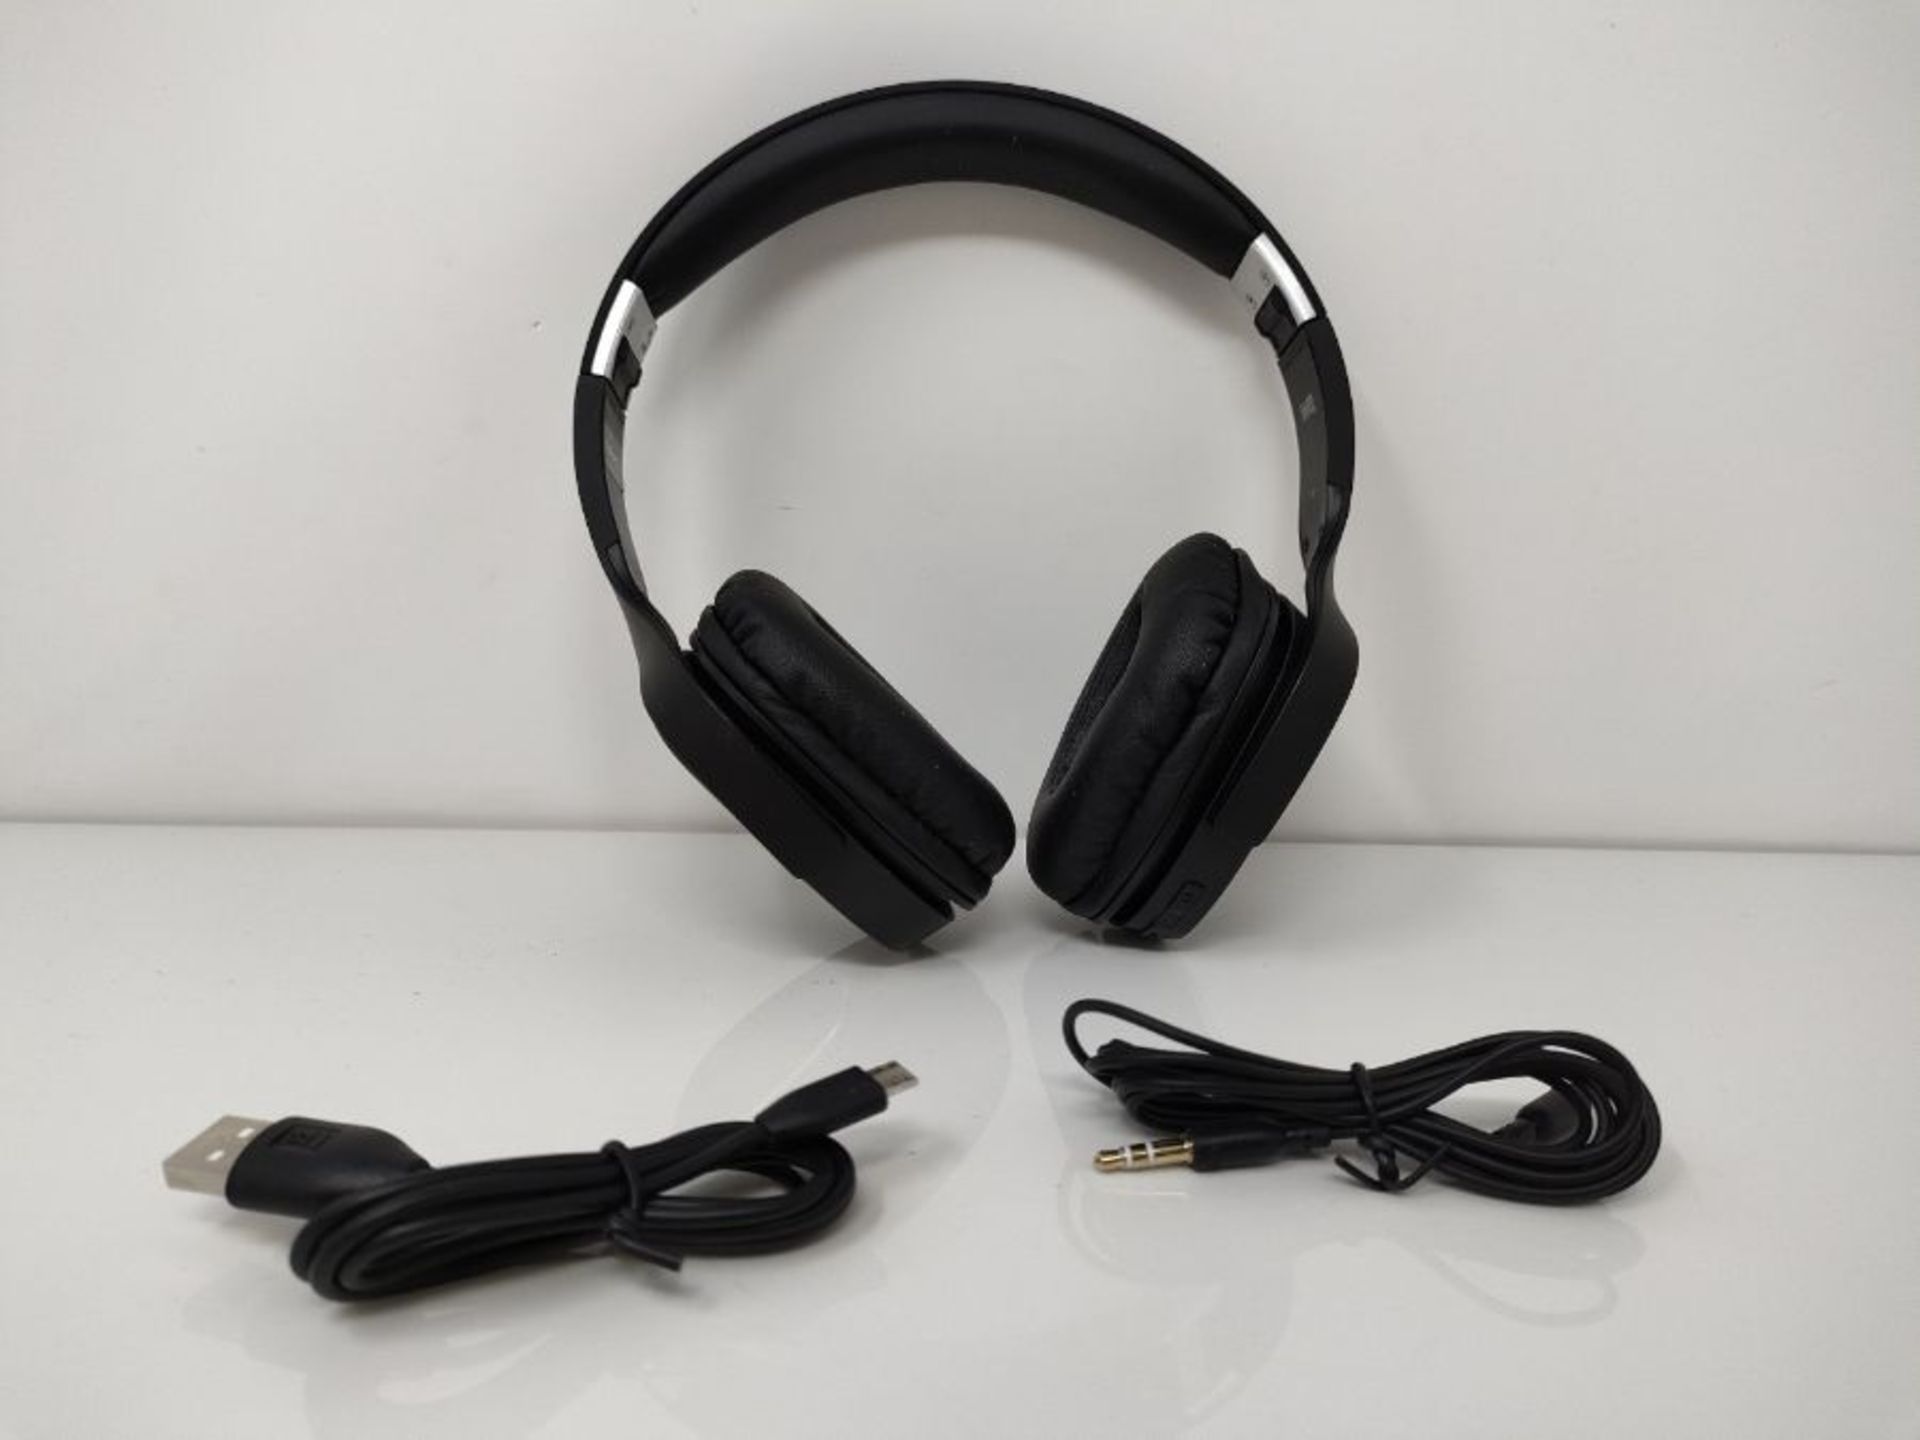 Casque WE Bluetooth rechargeable (Noir) - Image 3 of 3